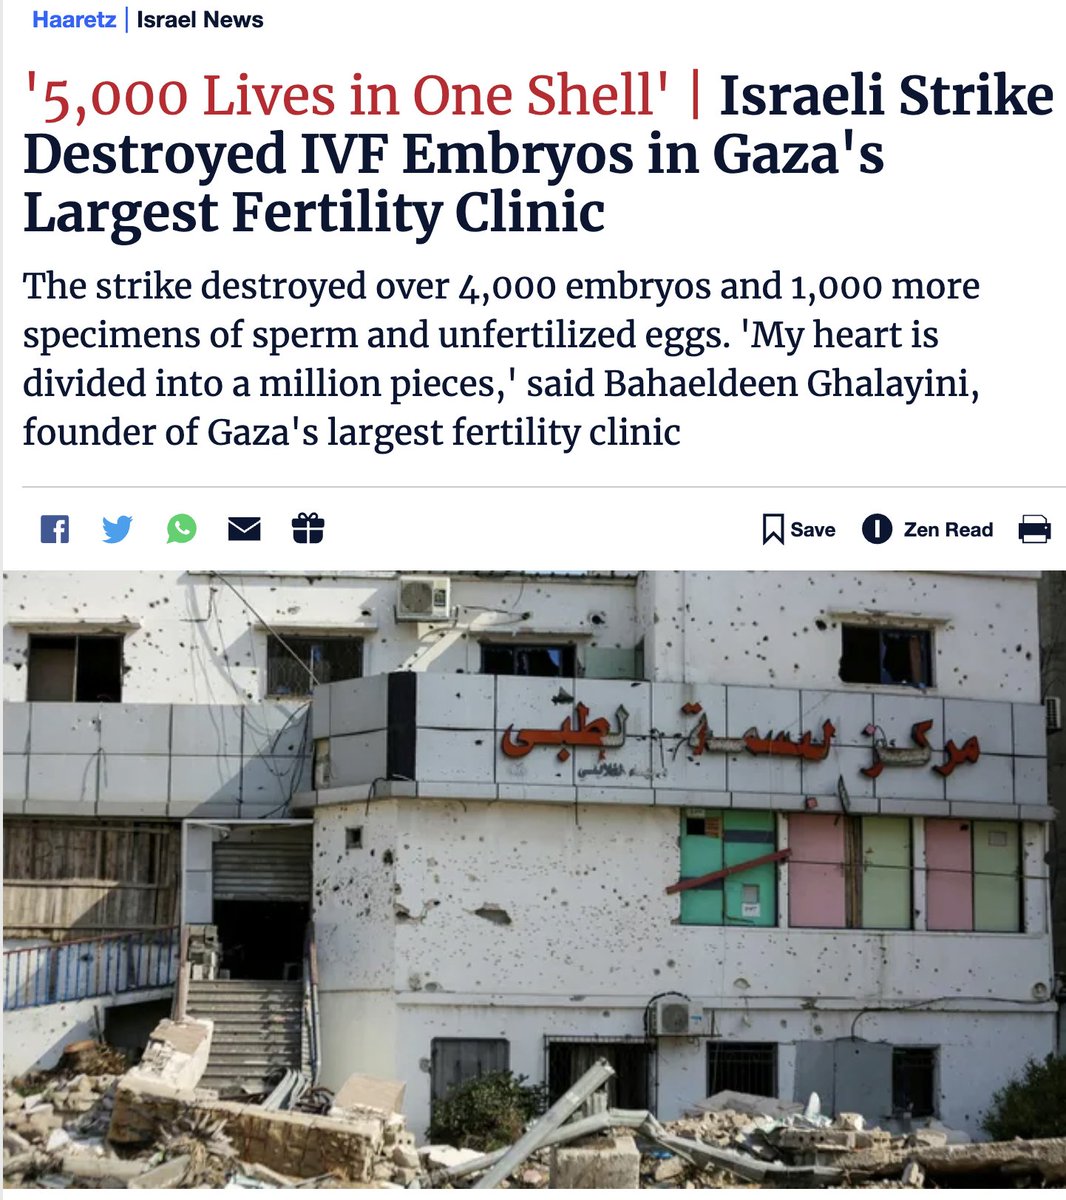 To the US republicans arguing frozen embryos should be regarded as children, Israel just bombed & destroyed 4,000 embryos in one go in Gaza's *clearly marked* largest fertility clinic, ending the dreams of parenthood for thousands of couples. Will you say a single word about it?